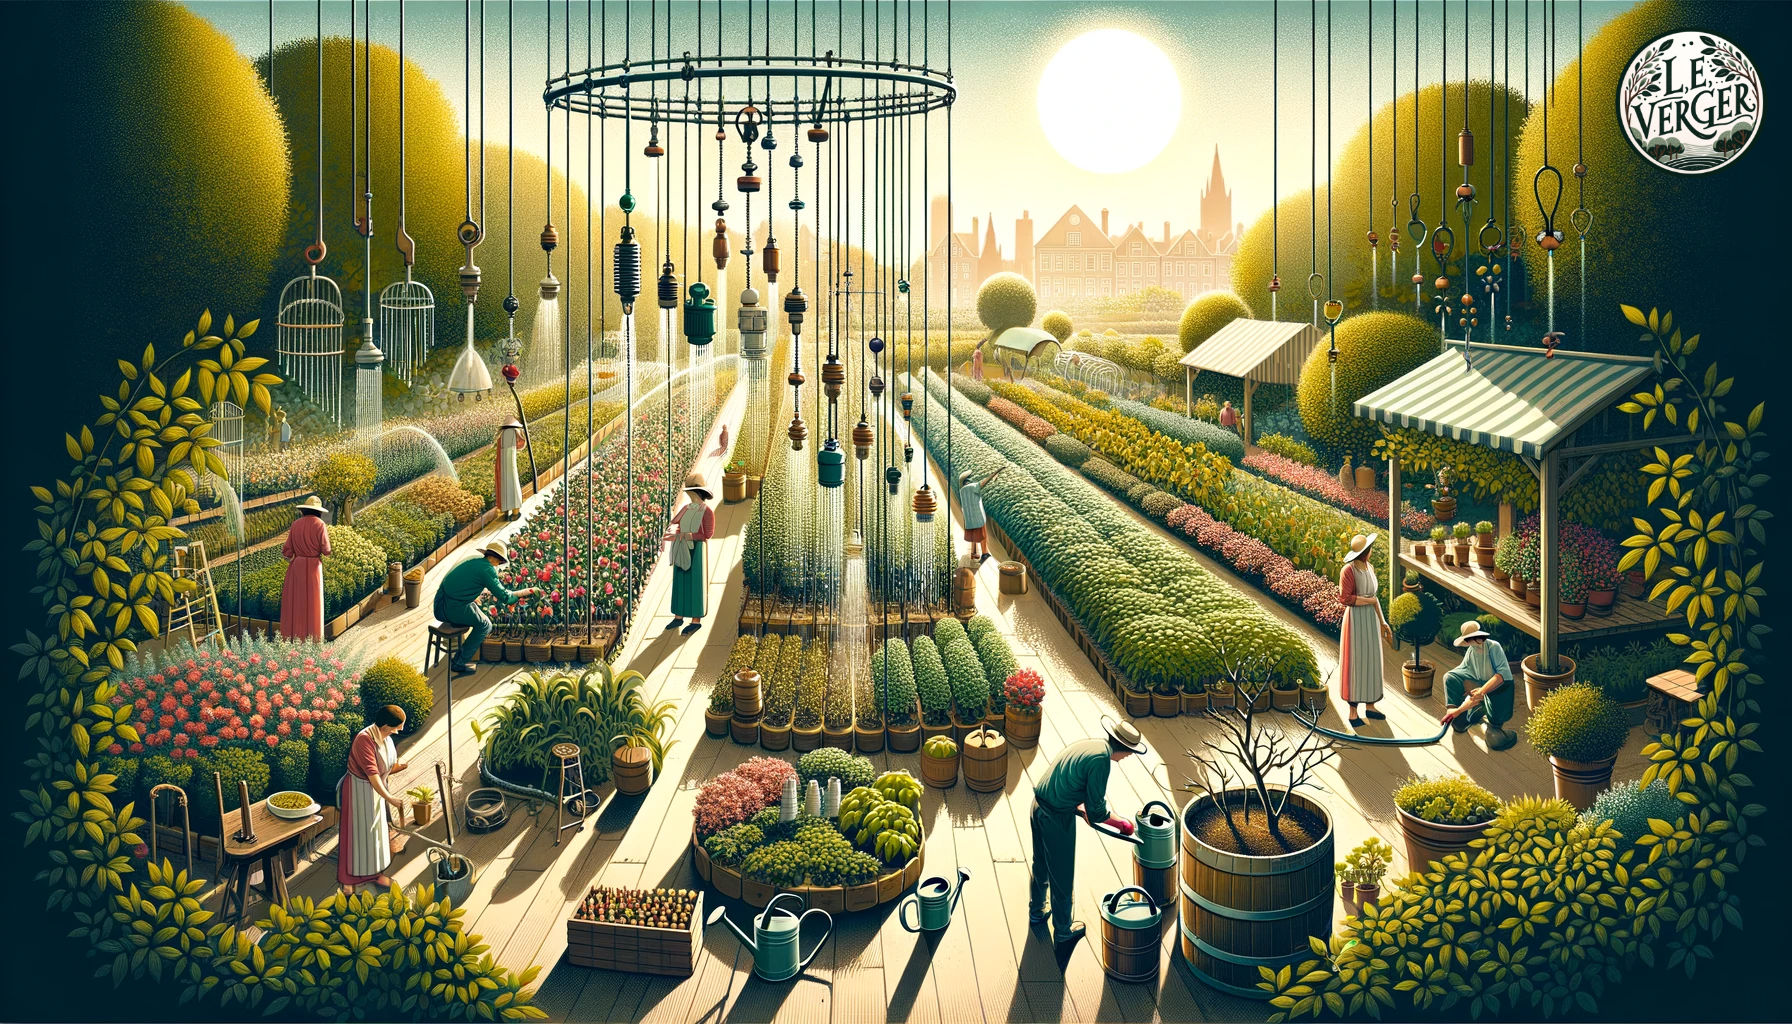 Illustration, wide aspect: A panoramic garden view at midday. The sun casts a warm glow over the plants. Key elements like a drip system, a rain chain leading to a barrel, and a watering can are evident. Diverse gardeners are scattered throughout the scene, each focused on different tasks, from pruning to watering.